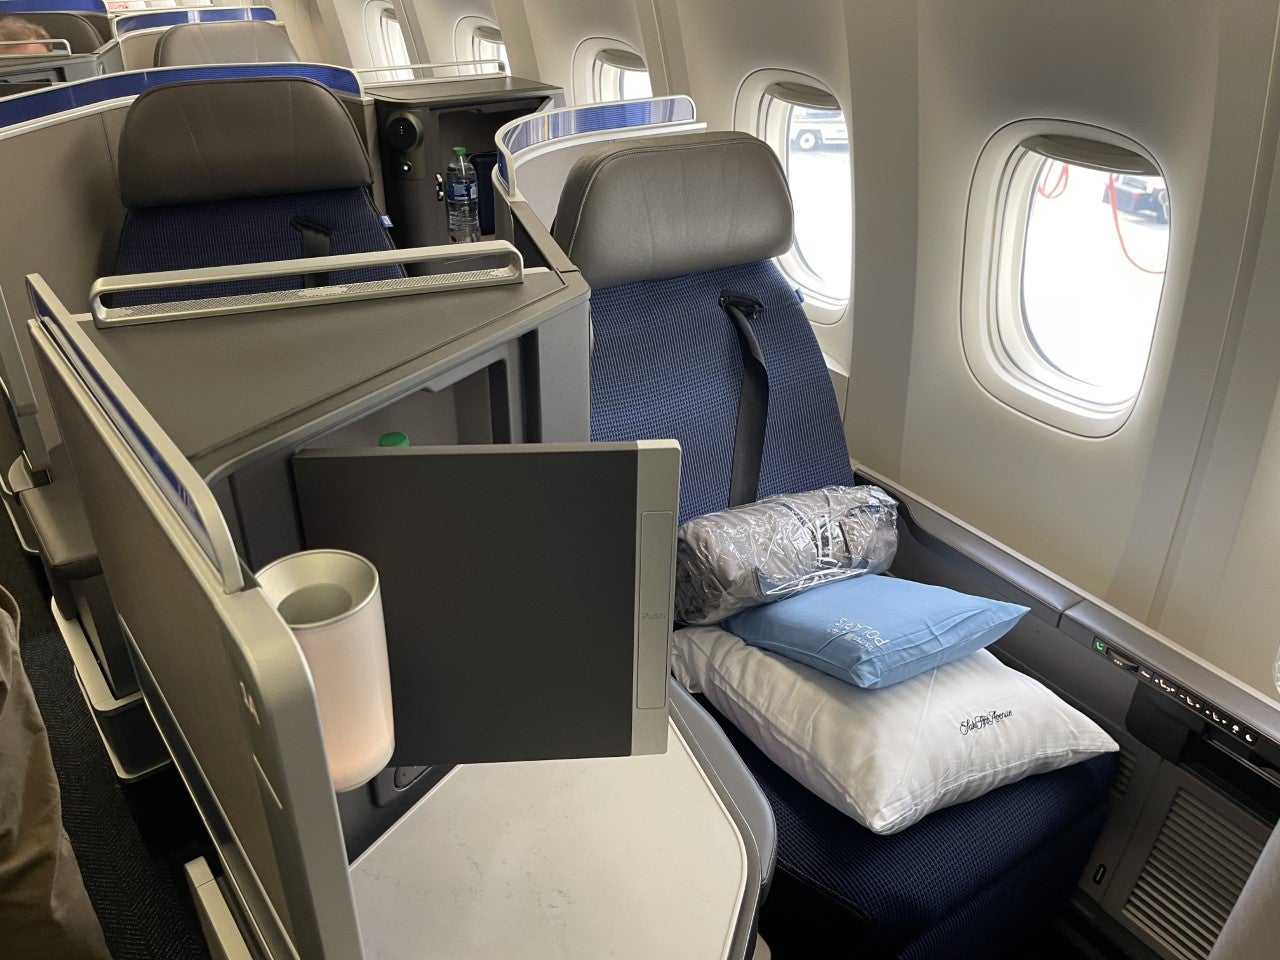 United Airlines Polaris business class on the Boeing 777-300ER